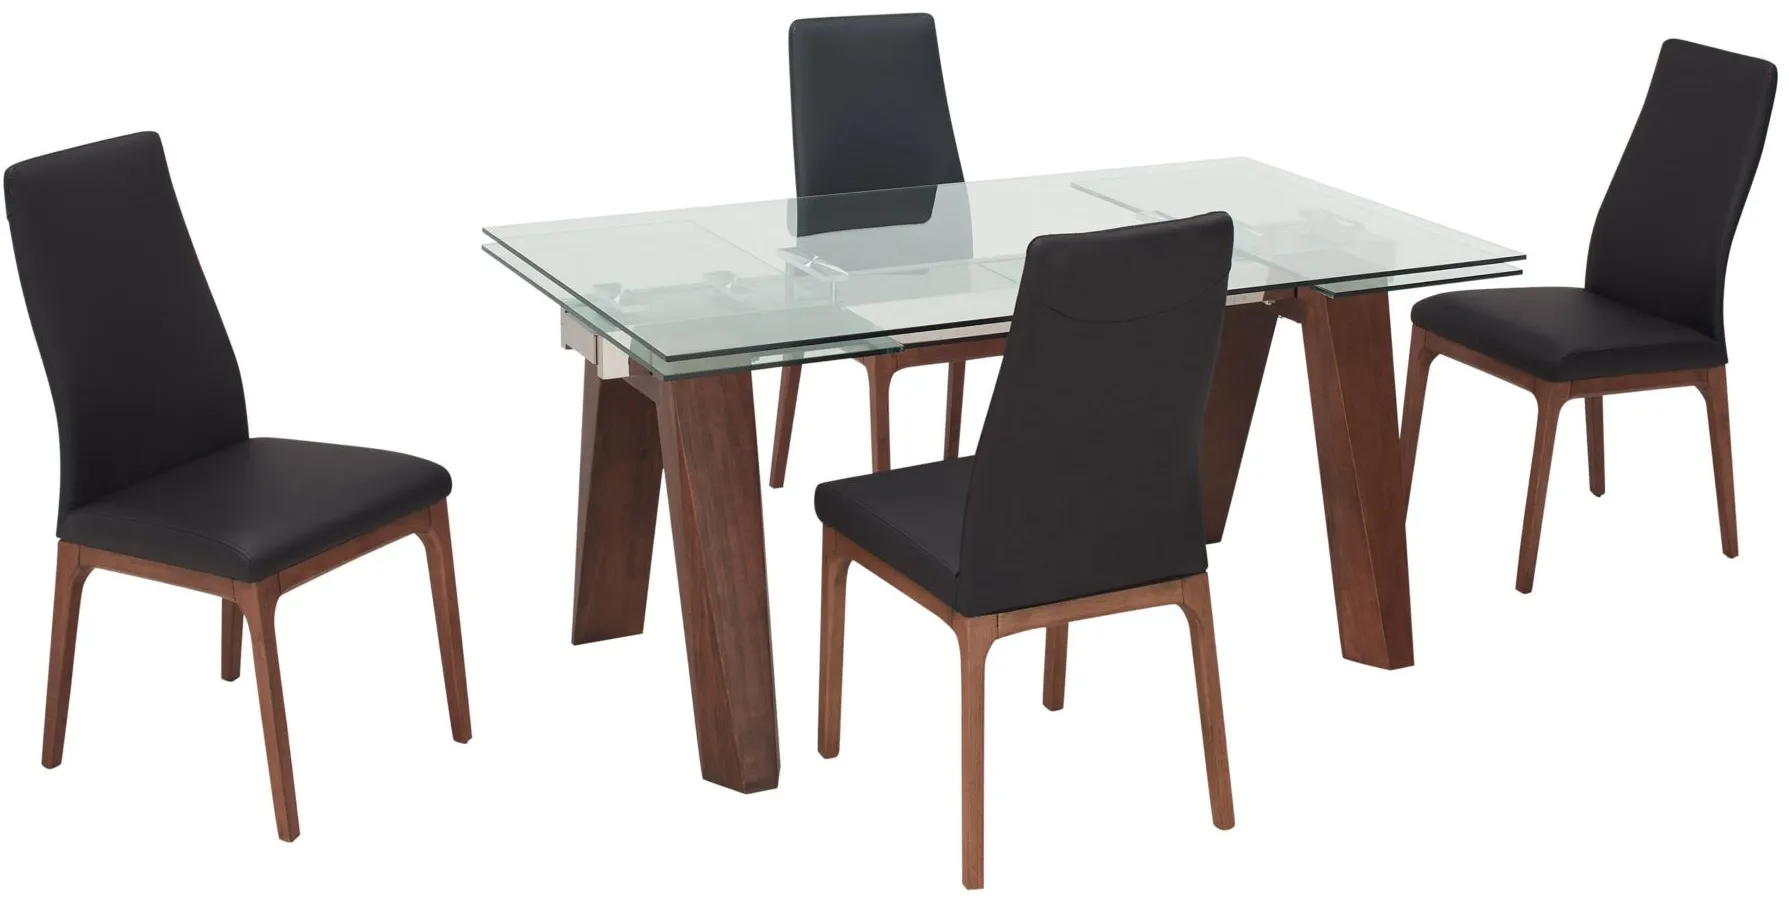 Sombra 5-pc. Dining Set (4 Black Chairs) in Glass/Wood/Black by Chintaly Imports